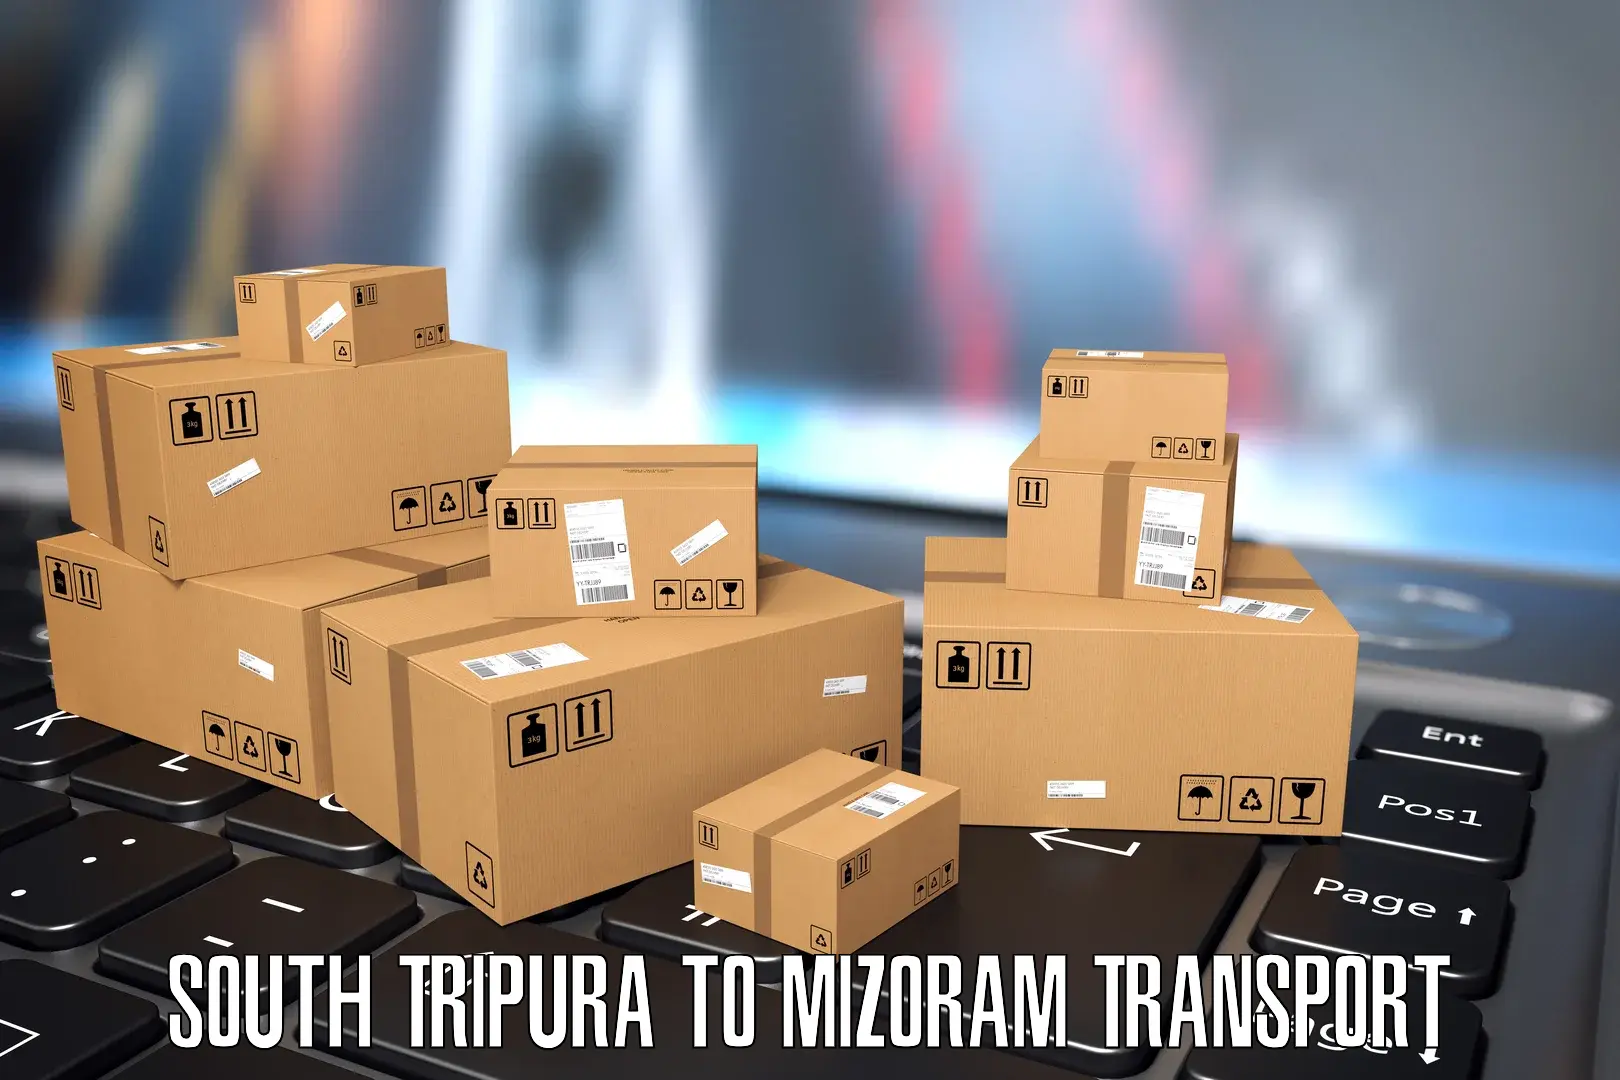 Transport bike from one state to another South Tripura to Mizoram